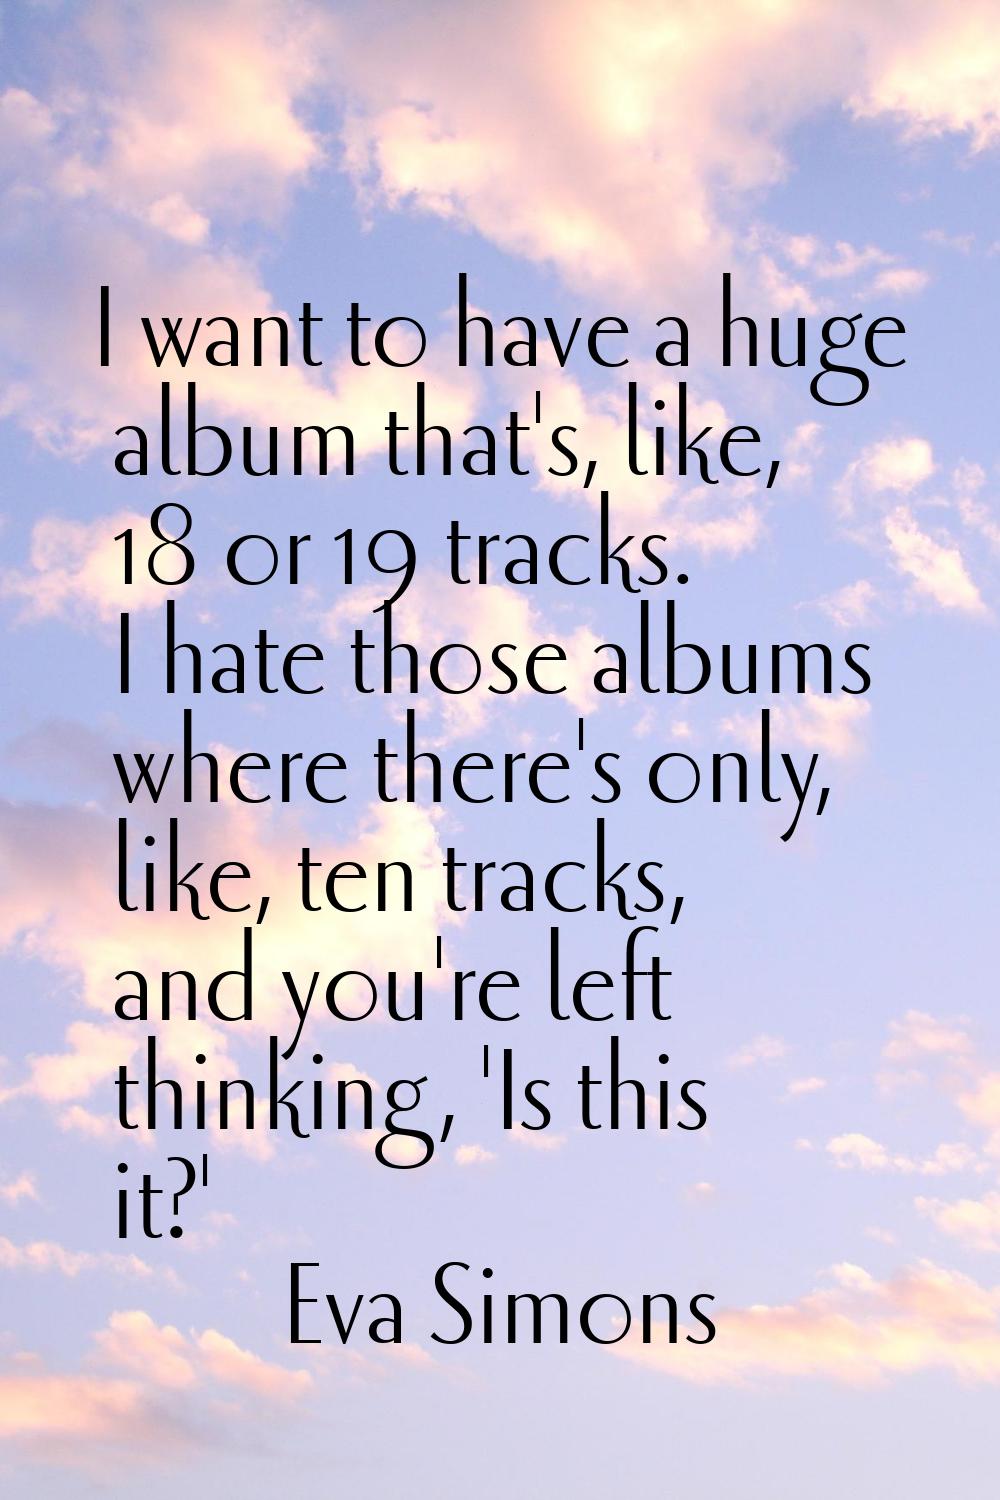 I want to have a huge album that's, like, 18 or 19 tracks. I hate those albums where there's only, 